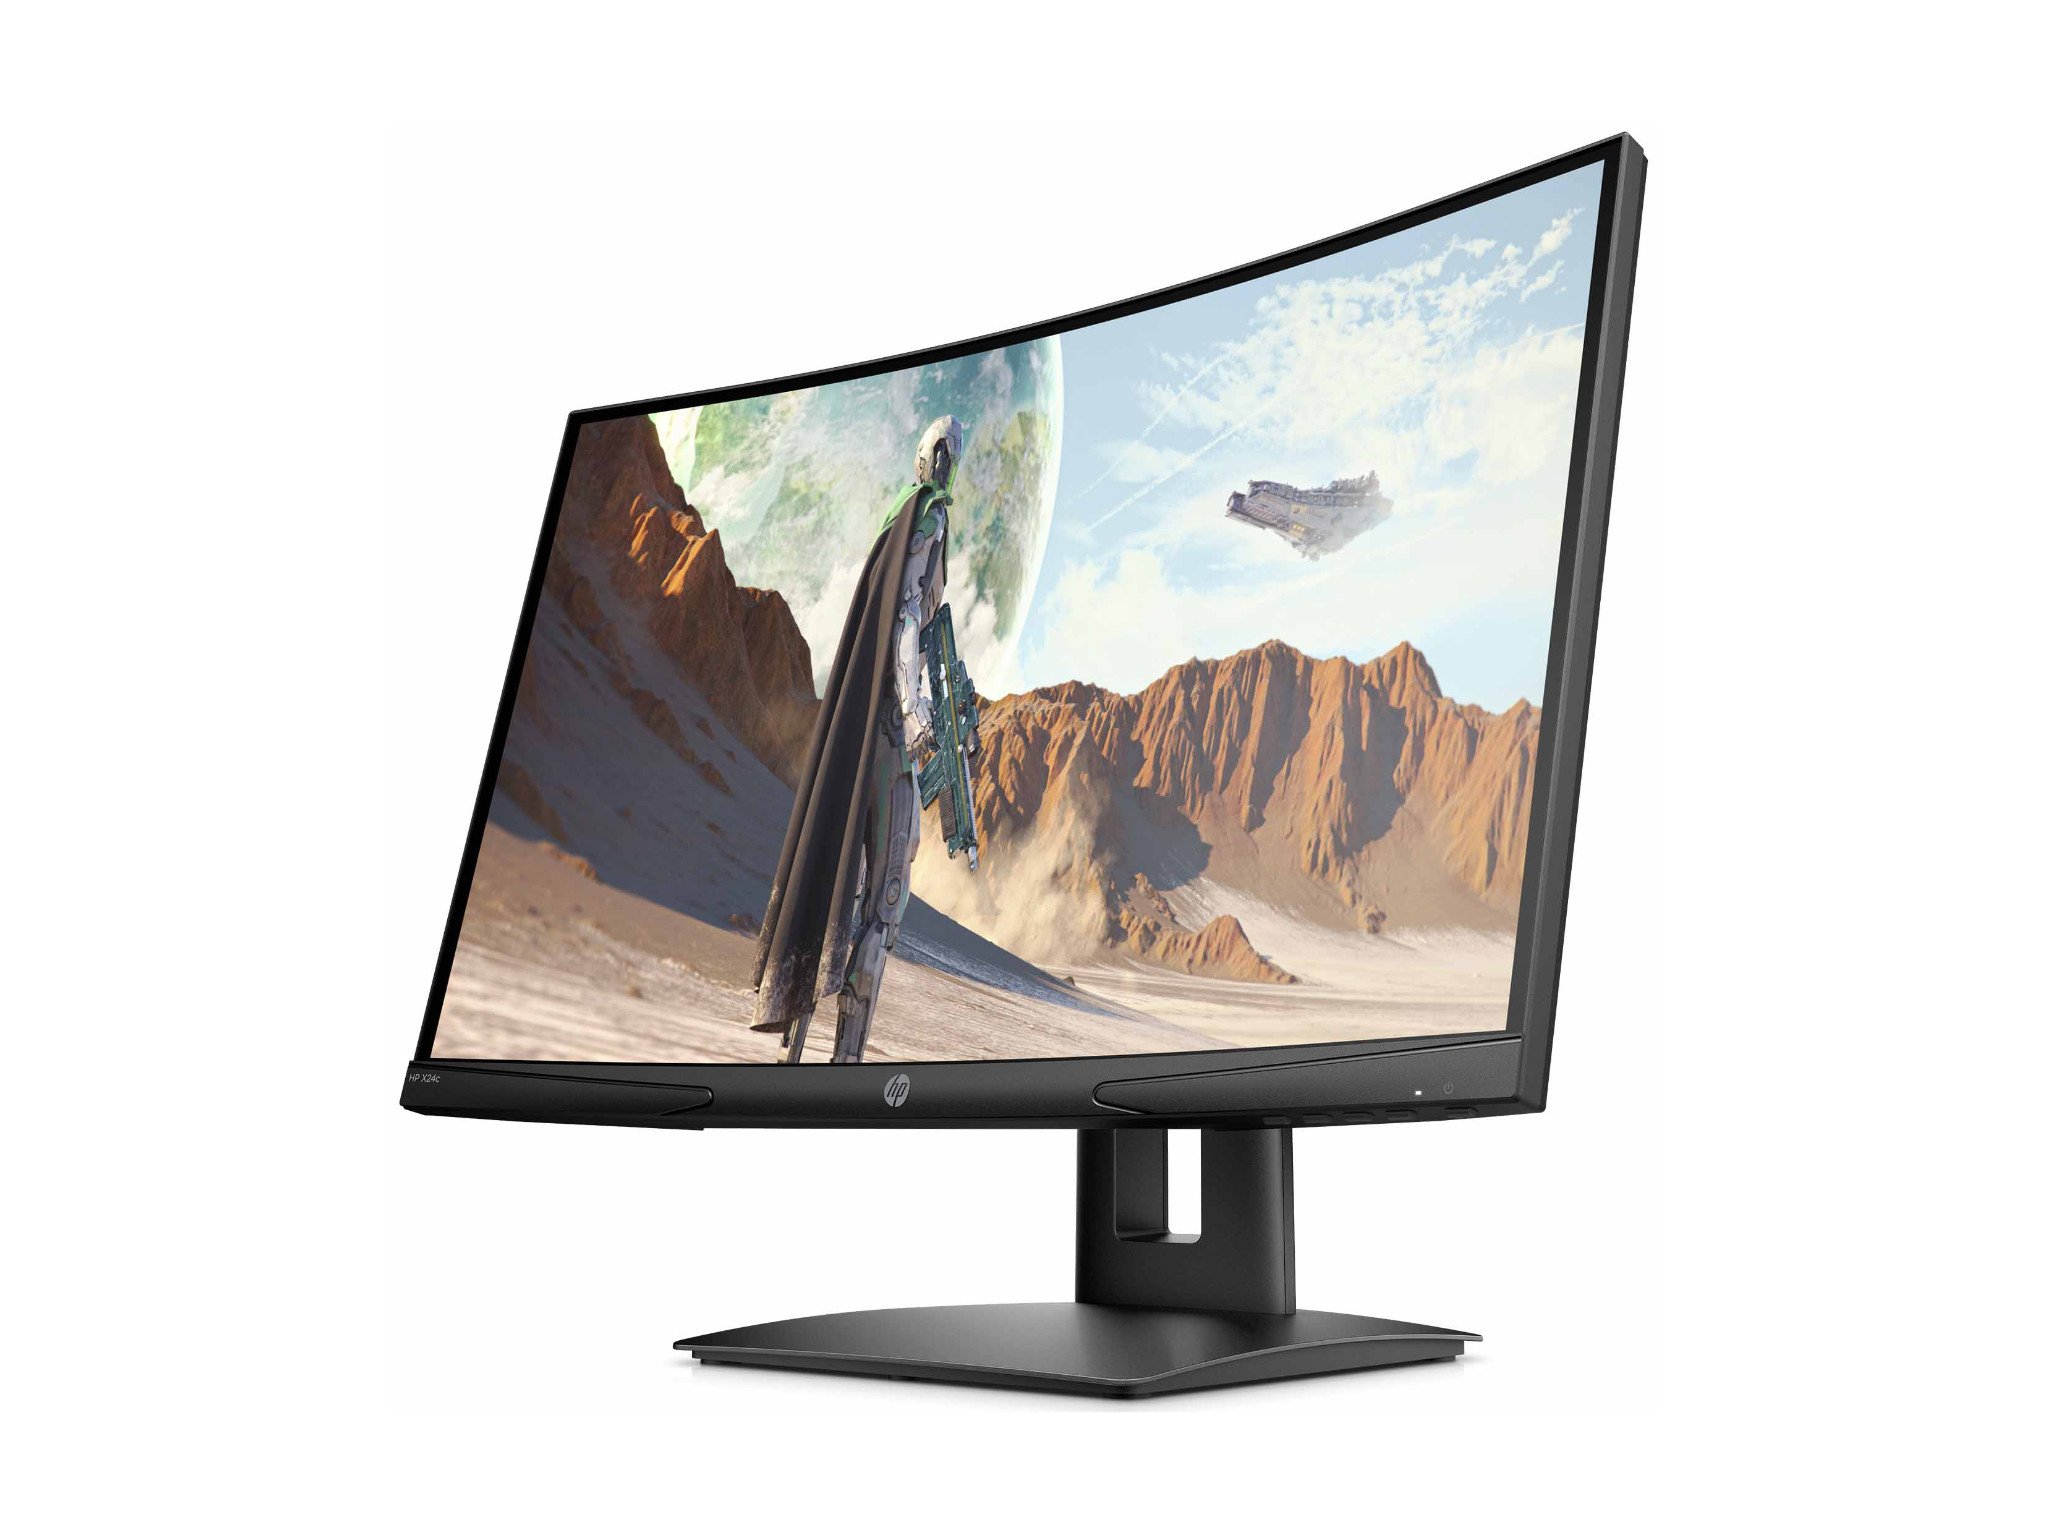 HP unveils its curviest gaming monitor yet | Windows Central